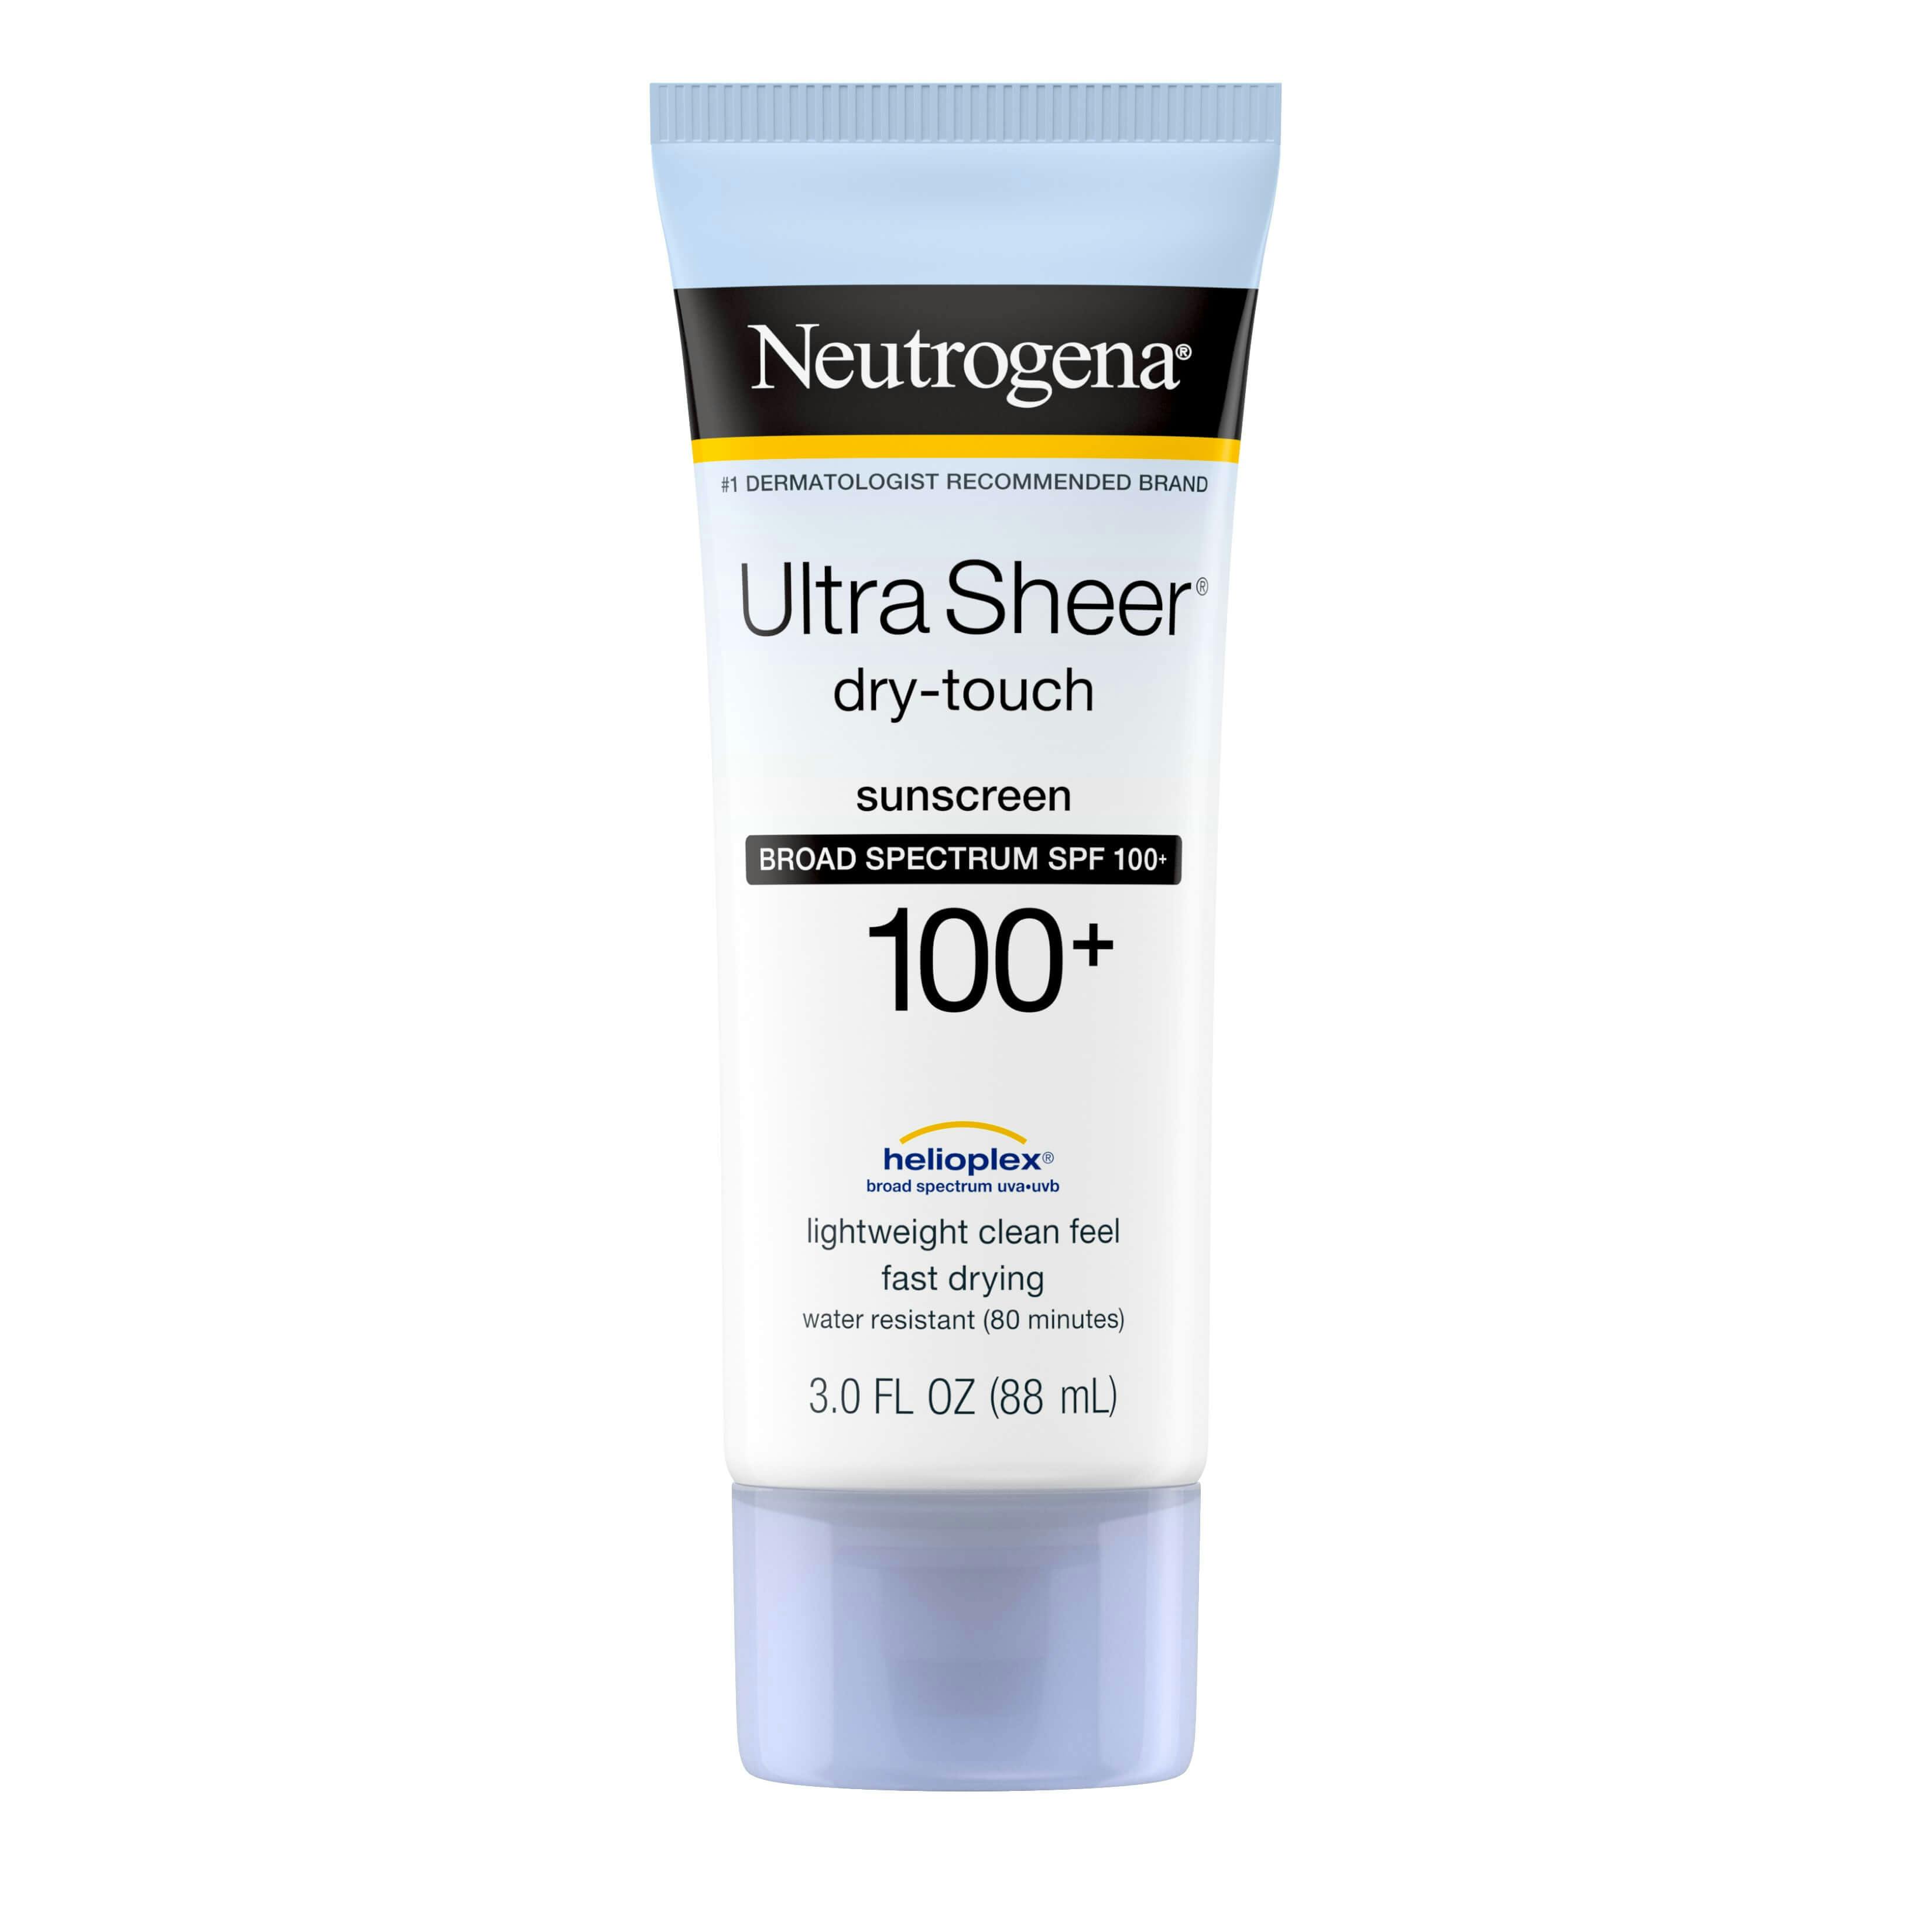 recommended sunblock for face